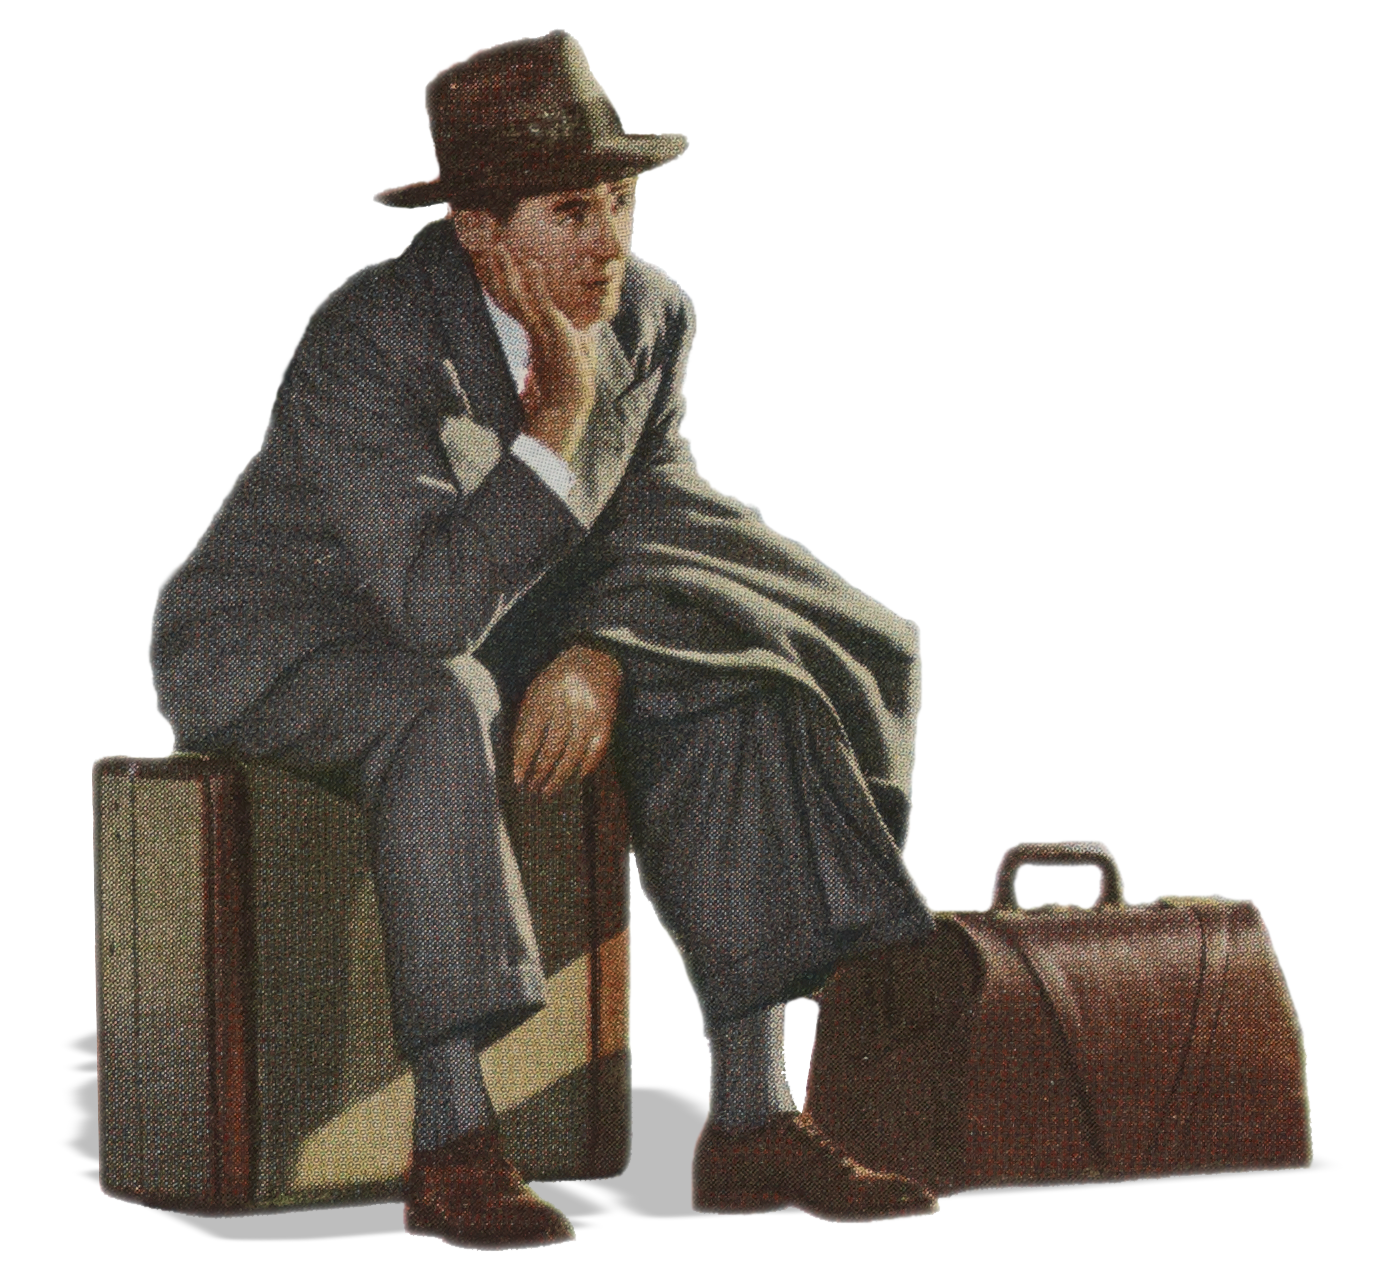 A dejected traveling salesman, wearing a suit and a fedora, rests on his suitcase, with his briefcase nearby.